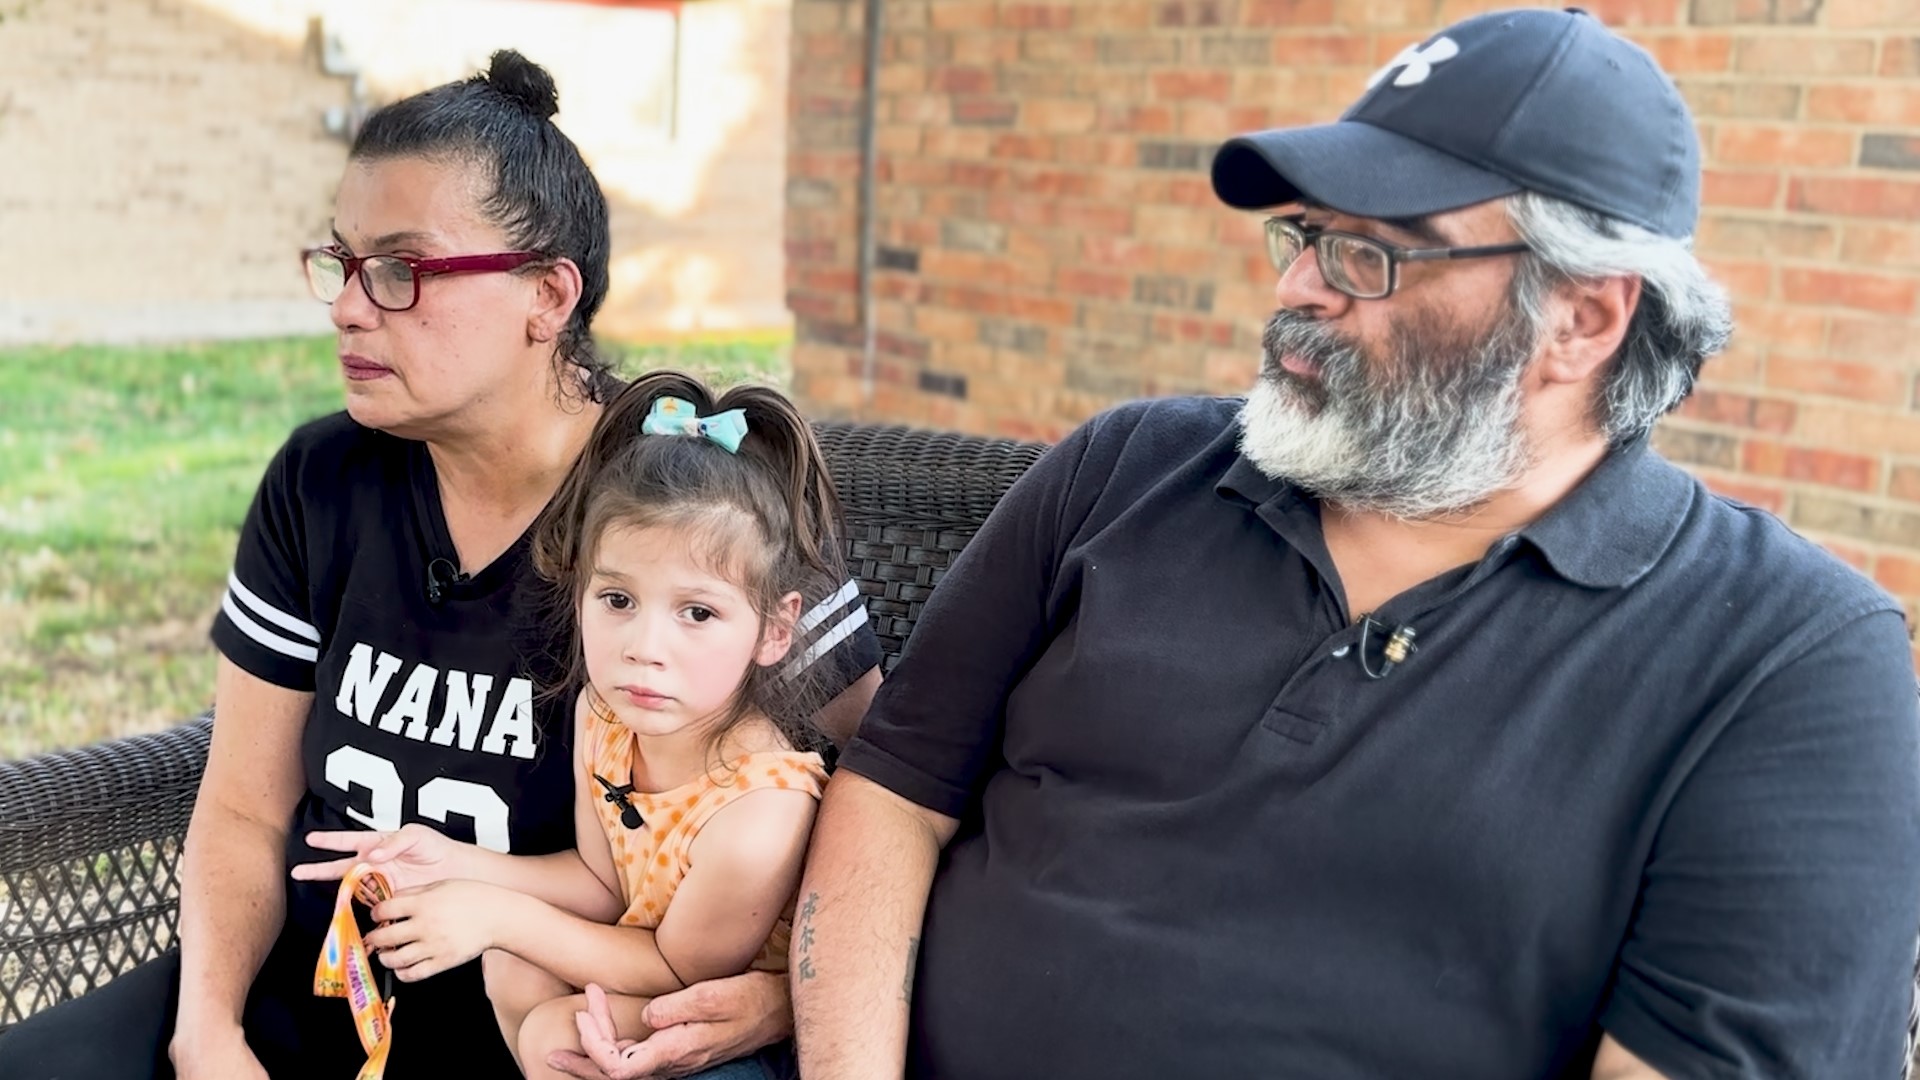 Fort Worth police are trying to identify a truck driver who hit the back of a minivan in a neighborhood and drove away. This is the family's full interview.